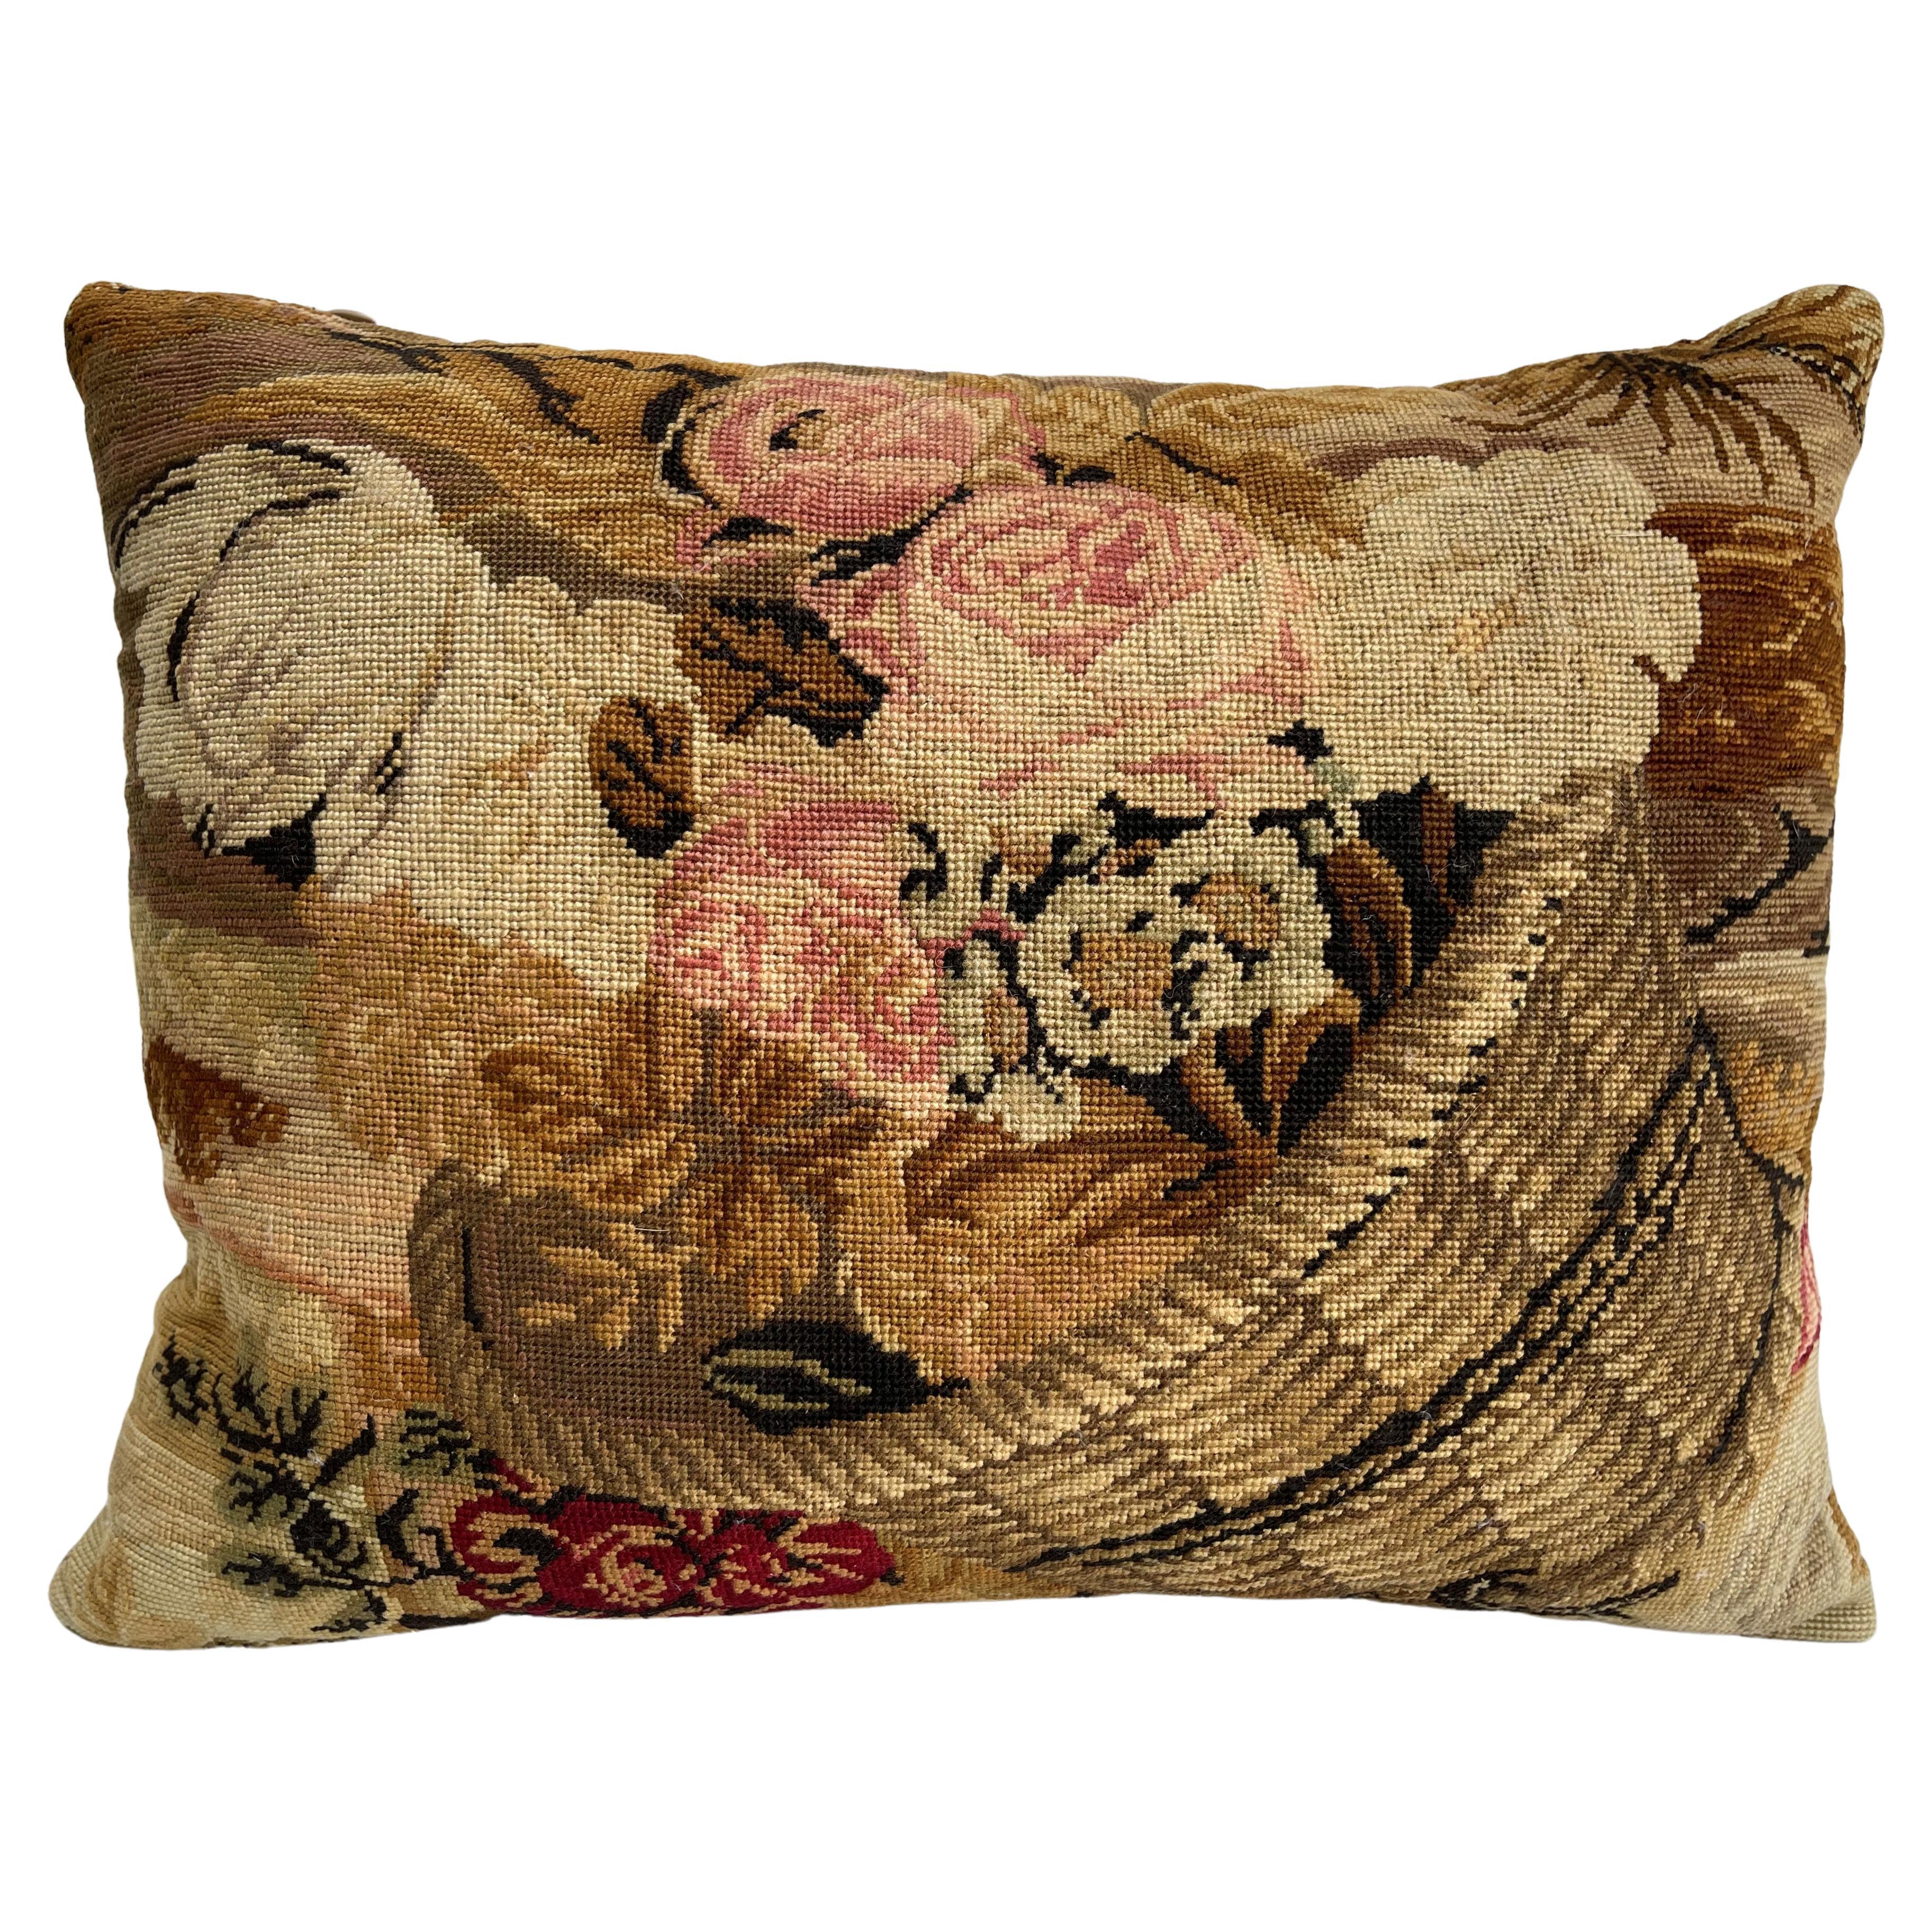 Early-19th Century English Tapestry Pillow - 15" X 10"